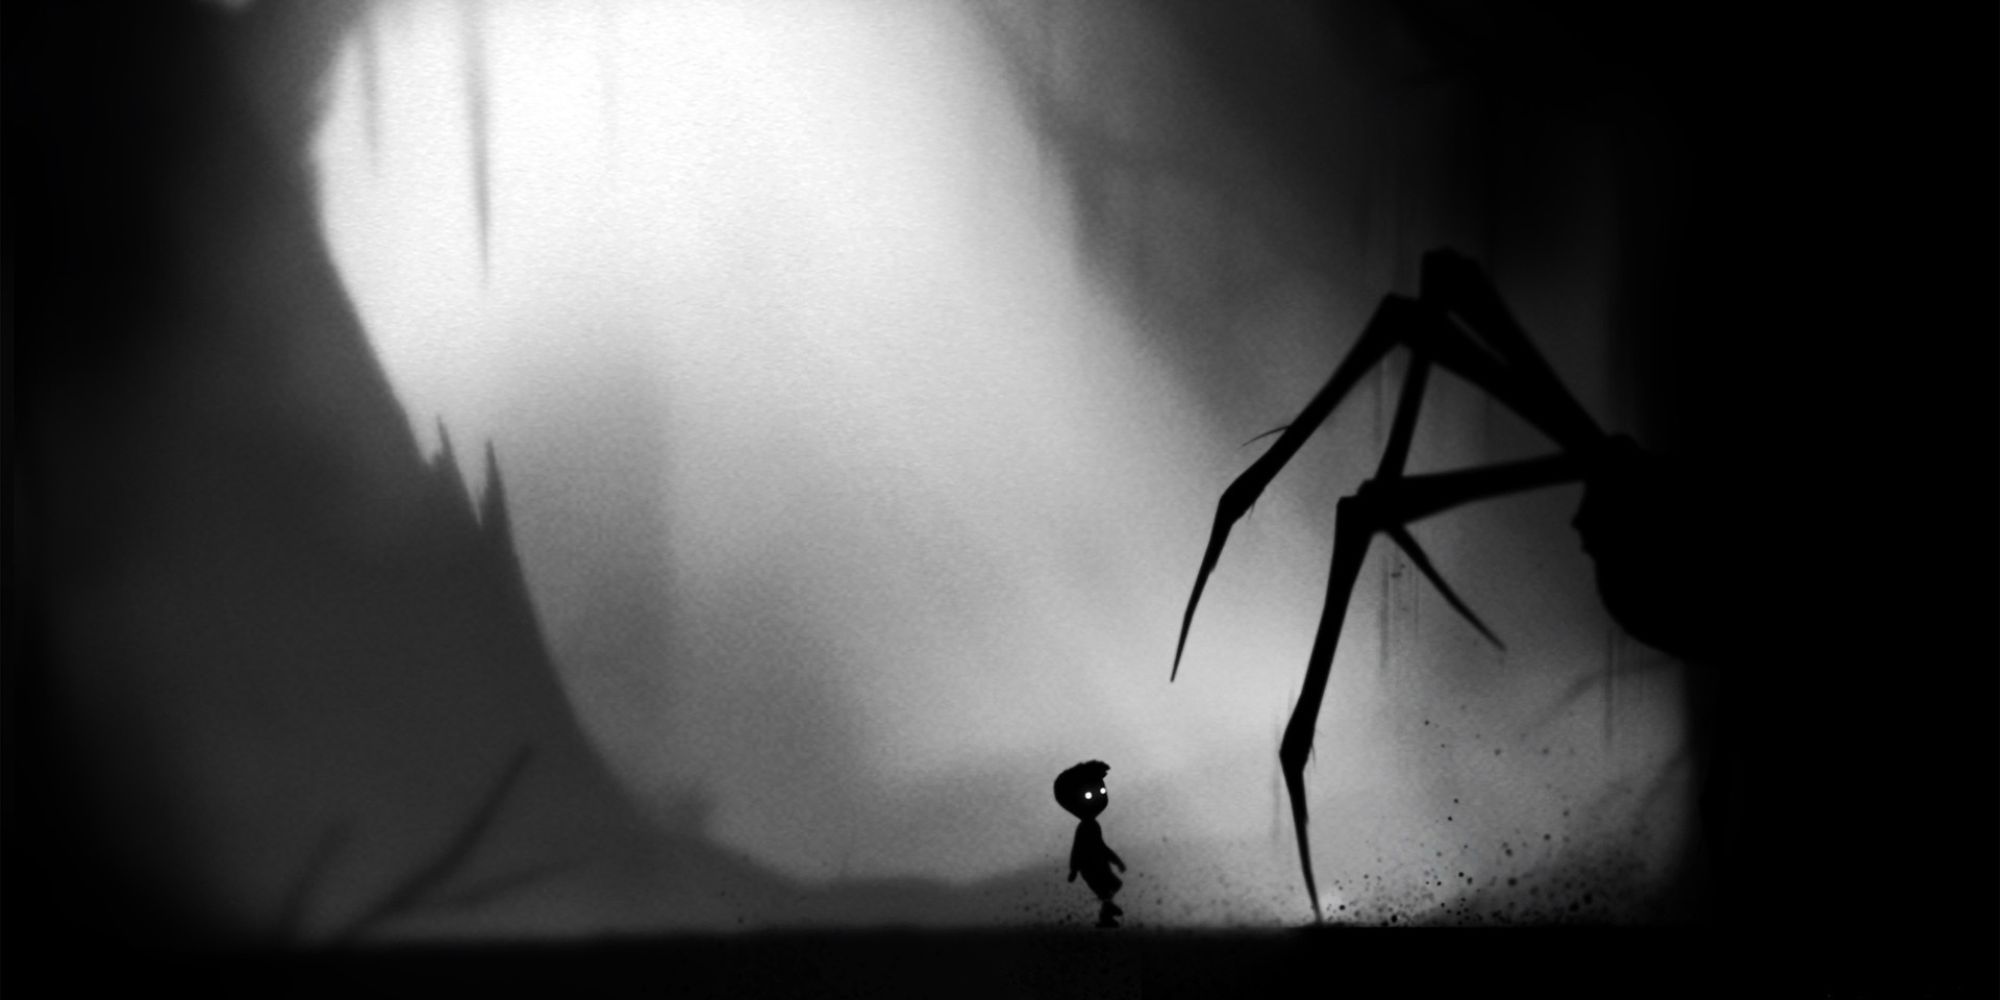 A shadowy figure stands in front of a gigantic pair of legs from Limbo.